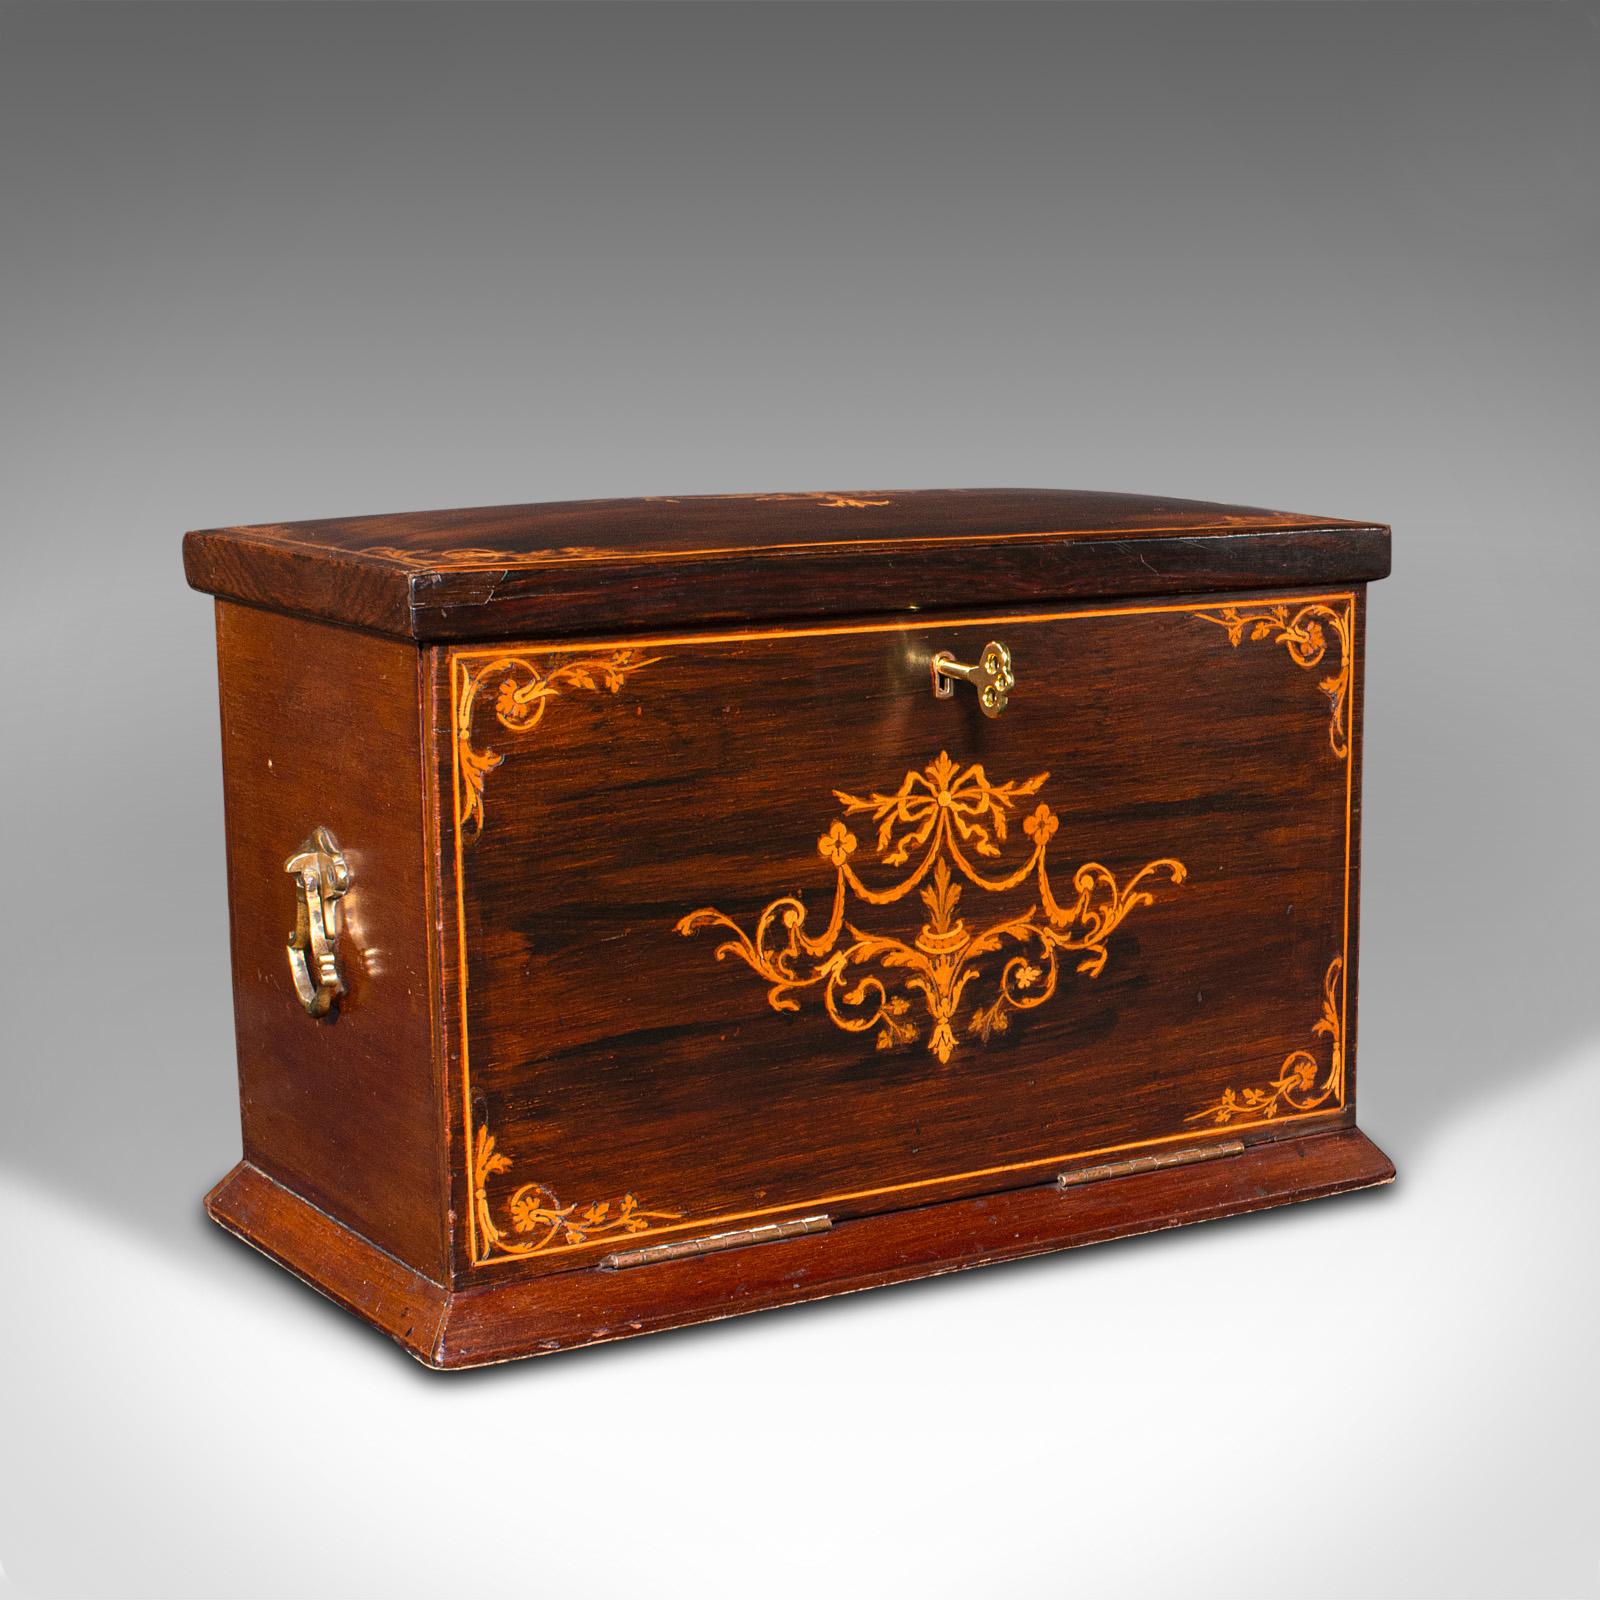 This is an antique travelling author’s writing box. An English, flame mahogany and boxwood correspondence case, dating to the late Victorian period, circa 1880.

Striking Victorian craftsmanship with delightful marquetry
Displays a desirable aged